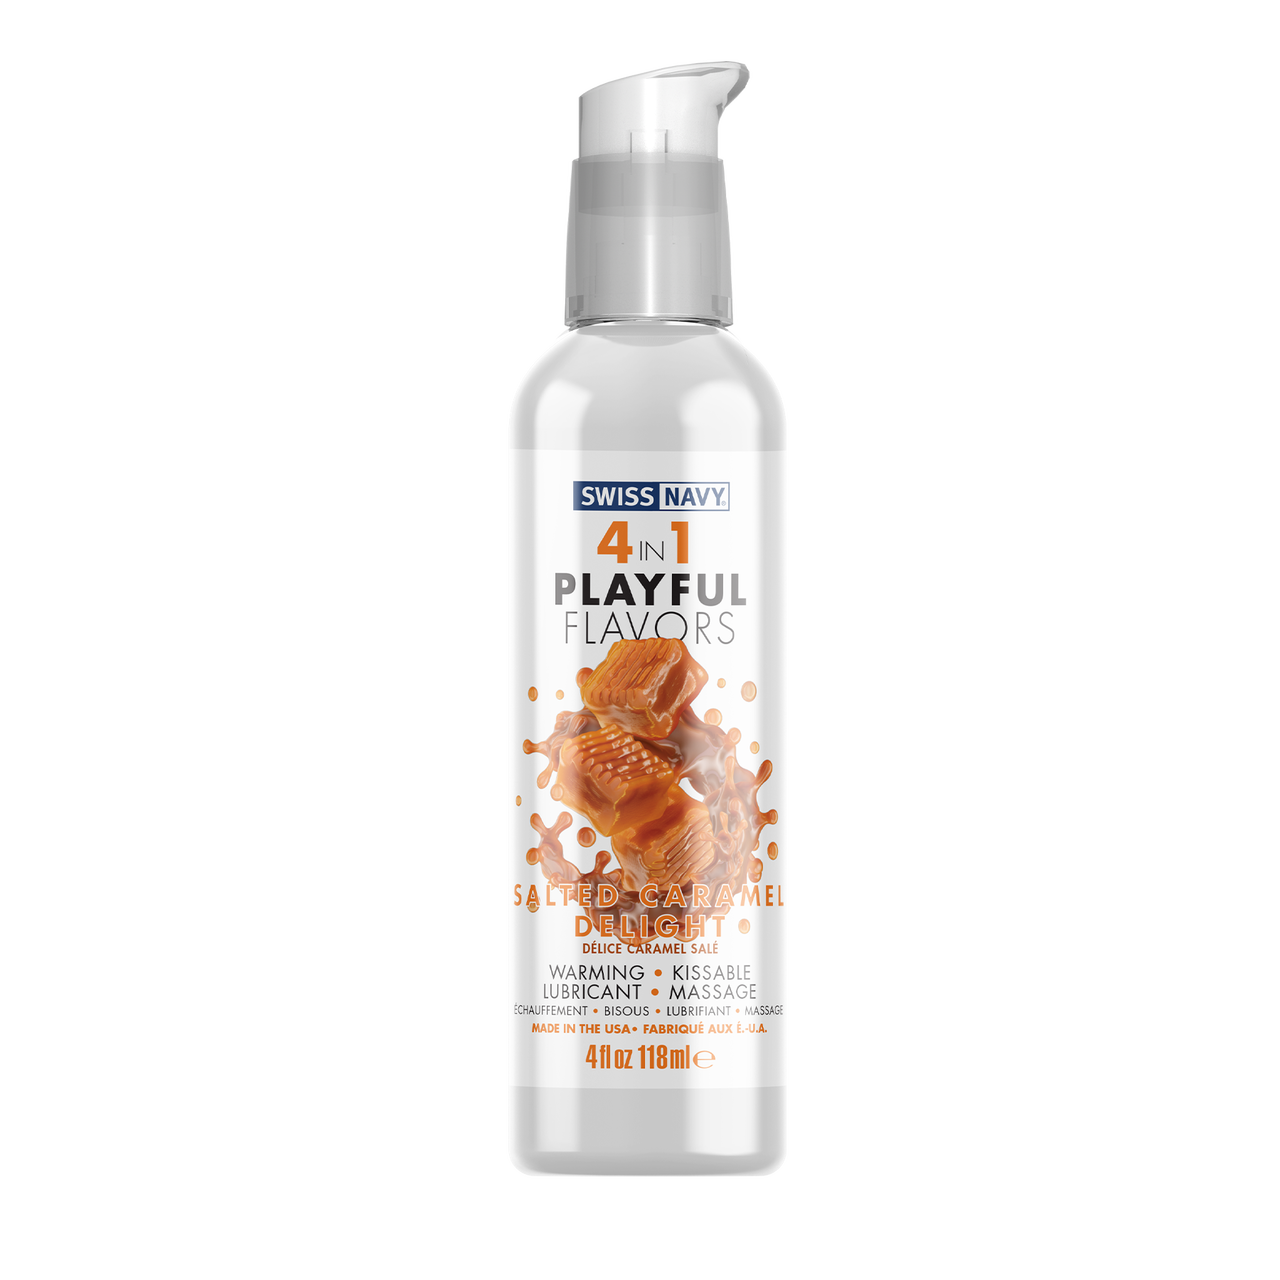 4in1 Playful Flavors -Salted Caramel 4oz